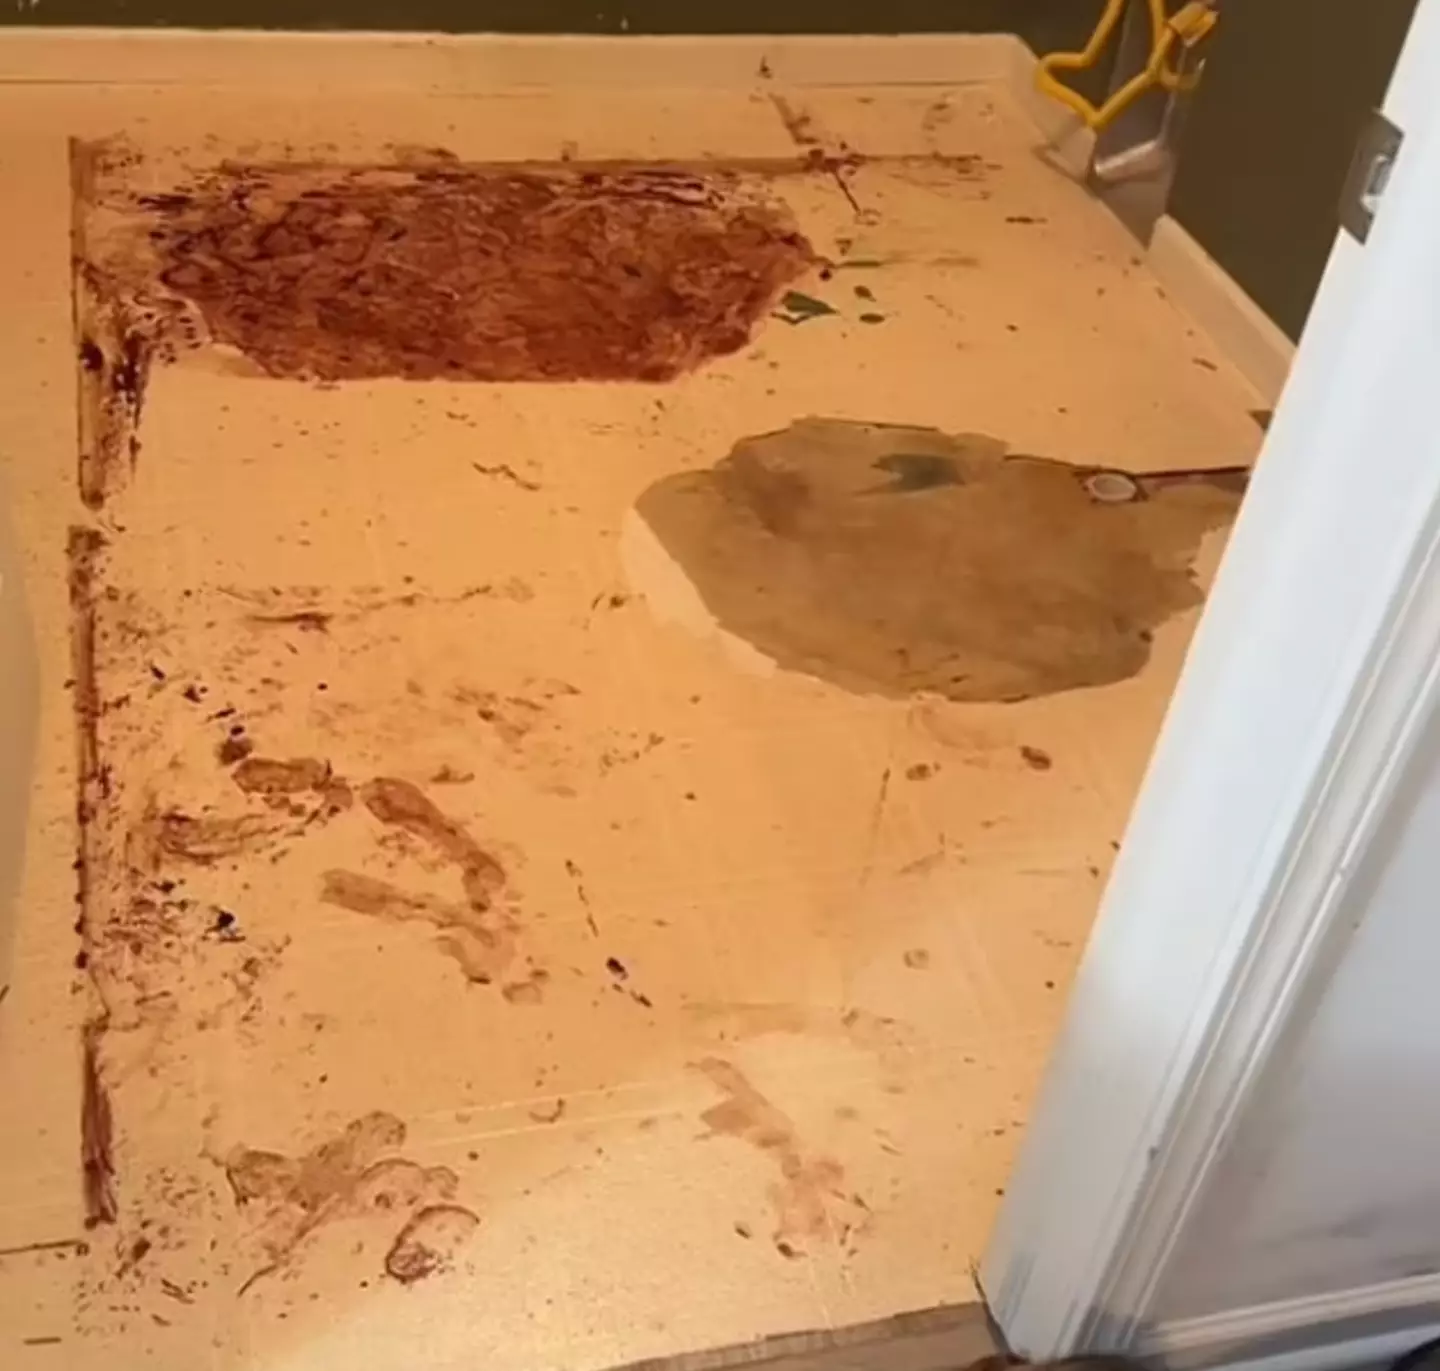 Audrey made the discovery of the bizarre red stain and footprints after a leak in her laundry room. (Tiktok/@chickennuggetlife8806)